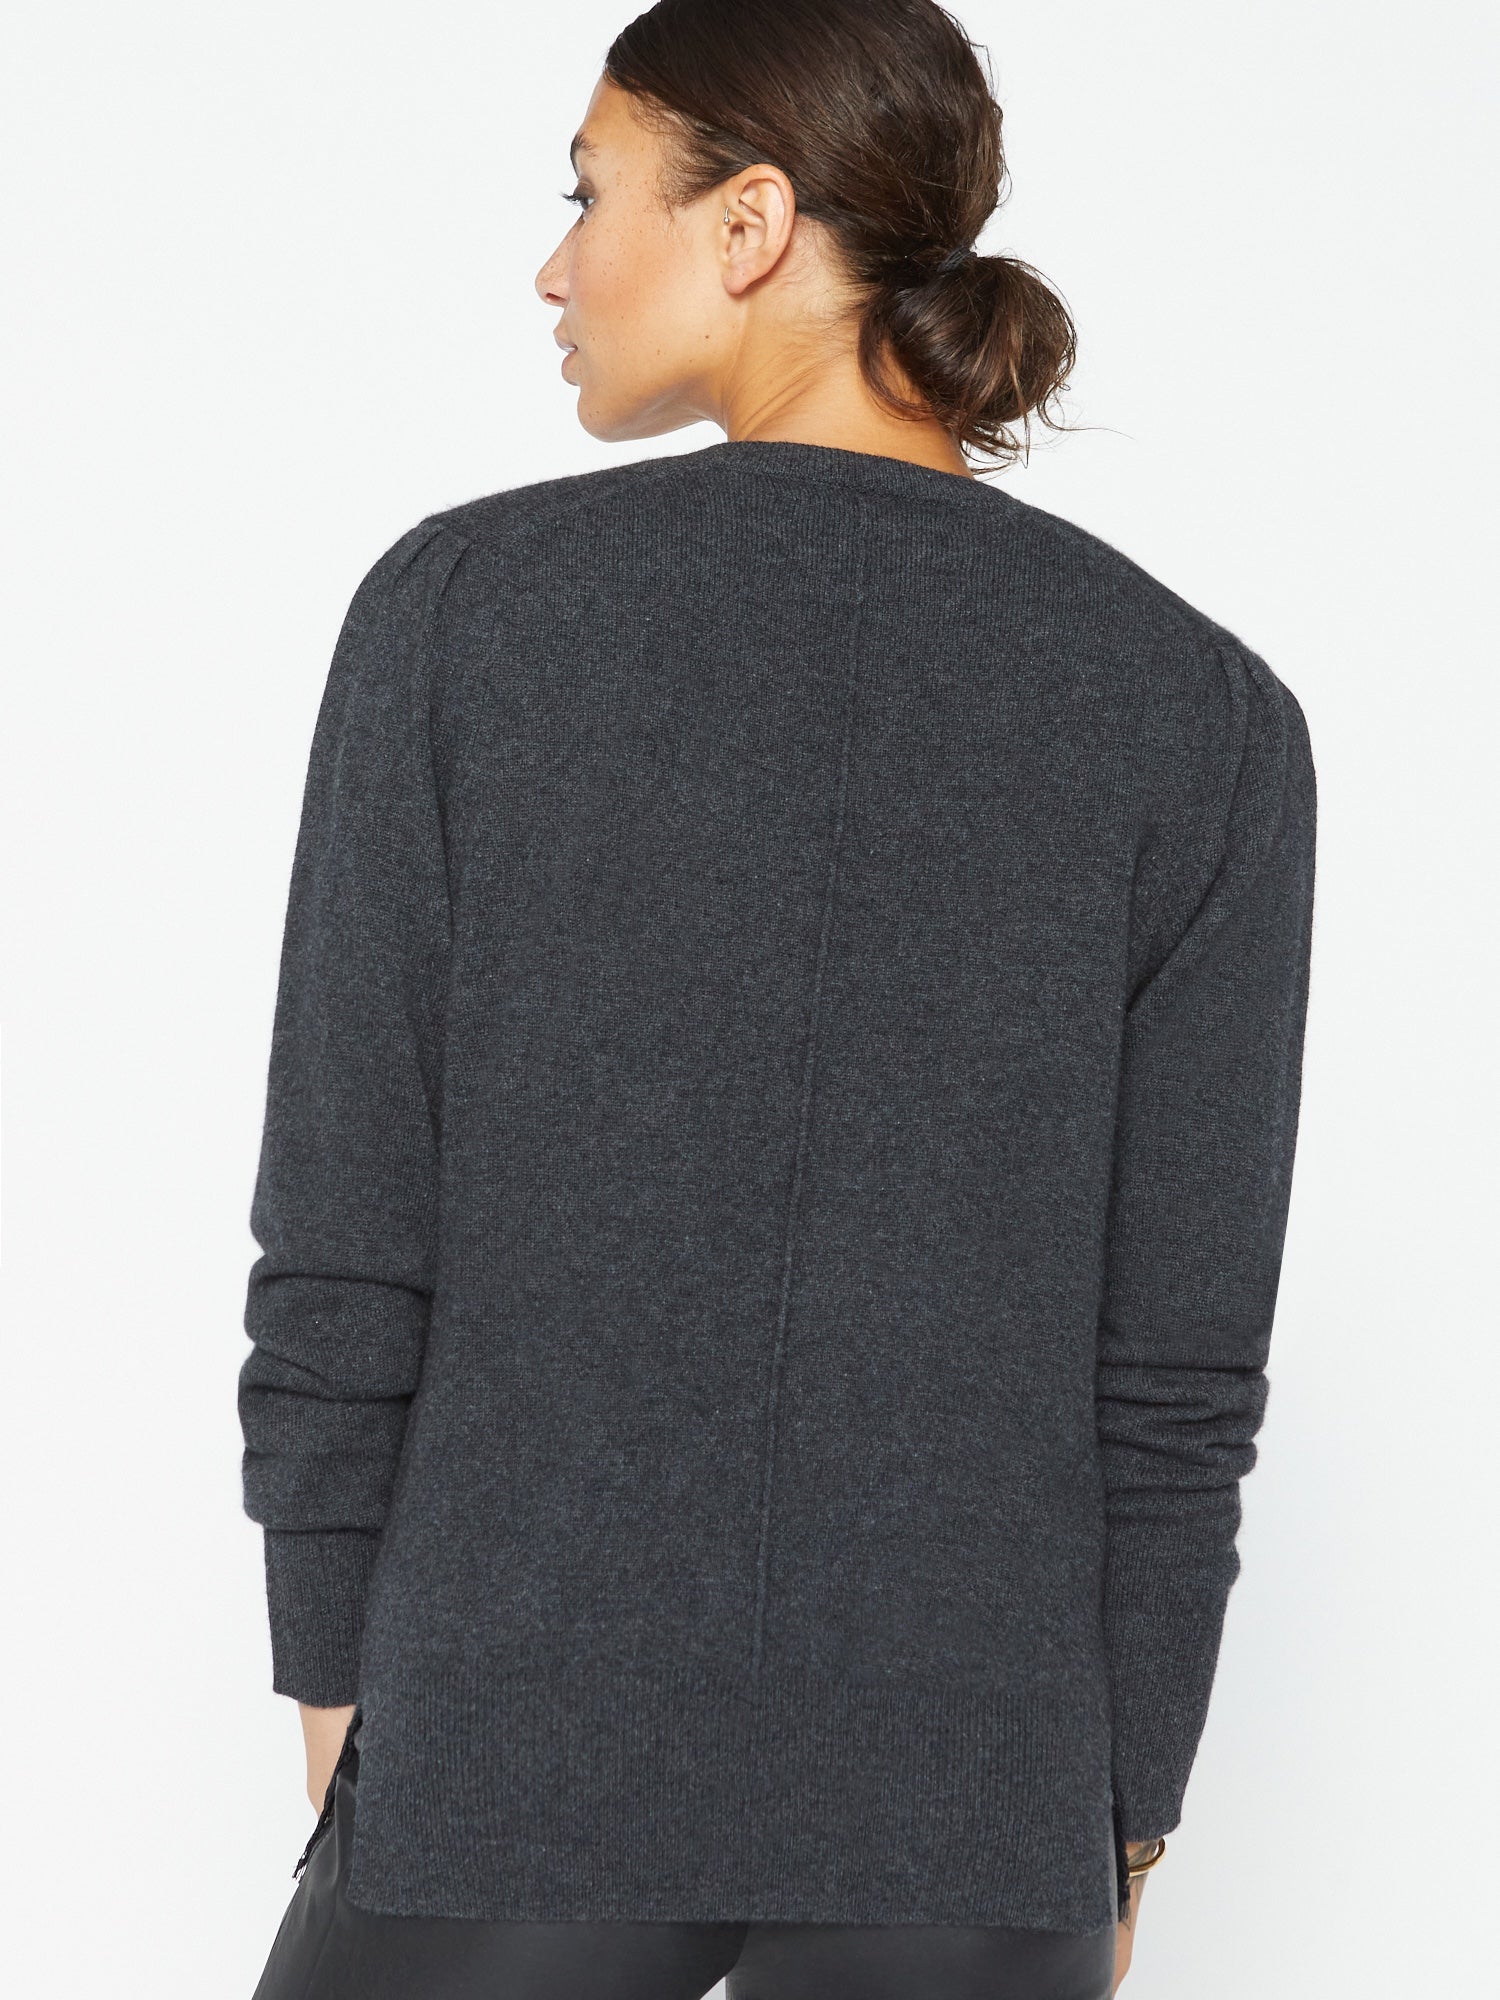 Marcella dark grey lace layered v-neck sweater back view